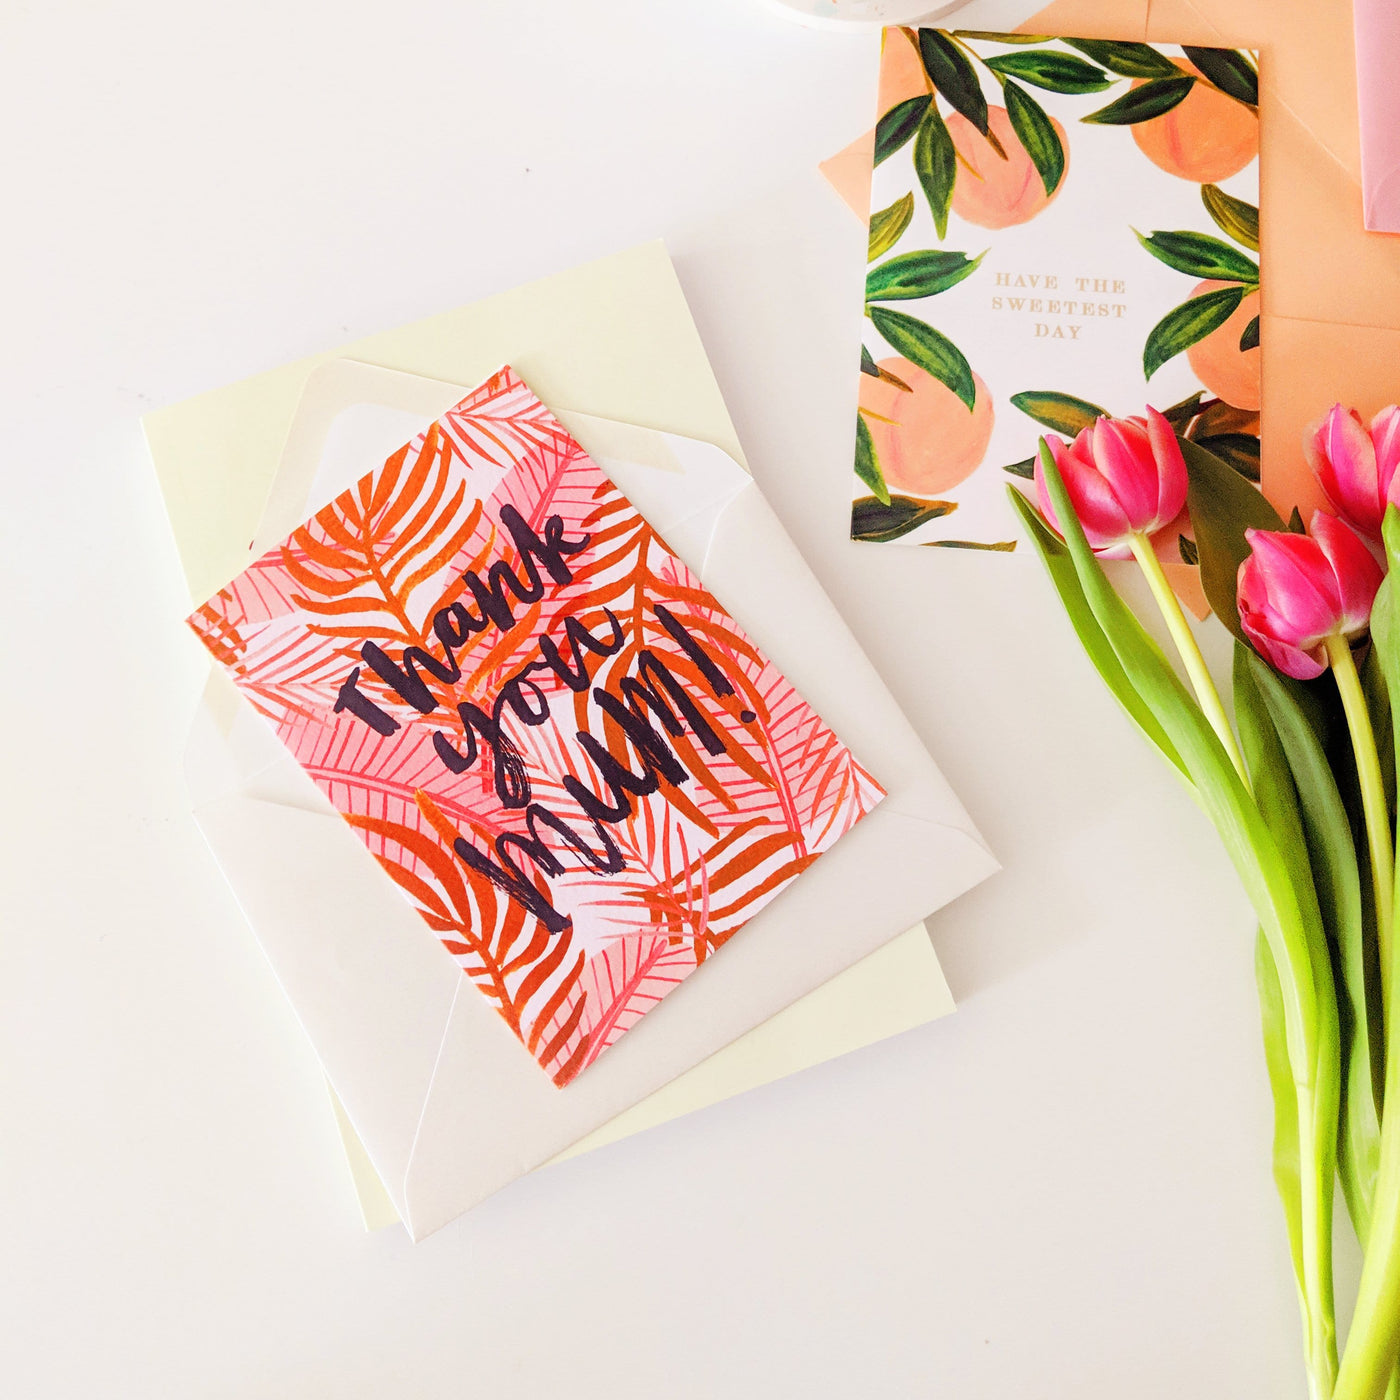 An Illustrated Pink Palm Leaf Card With The Words Thank You Mum In Brush Lettering With A White Envelope Next To Some Pink Tulips - Annie Dornan Smith